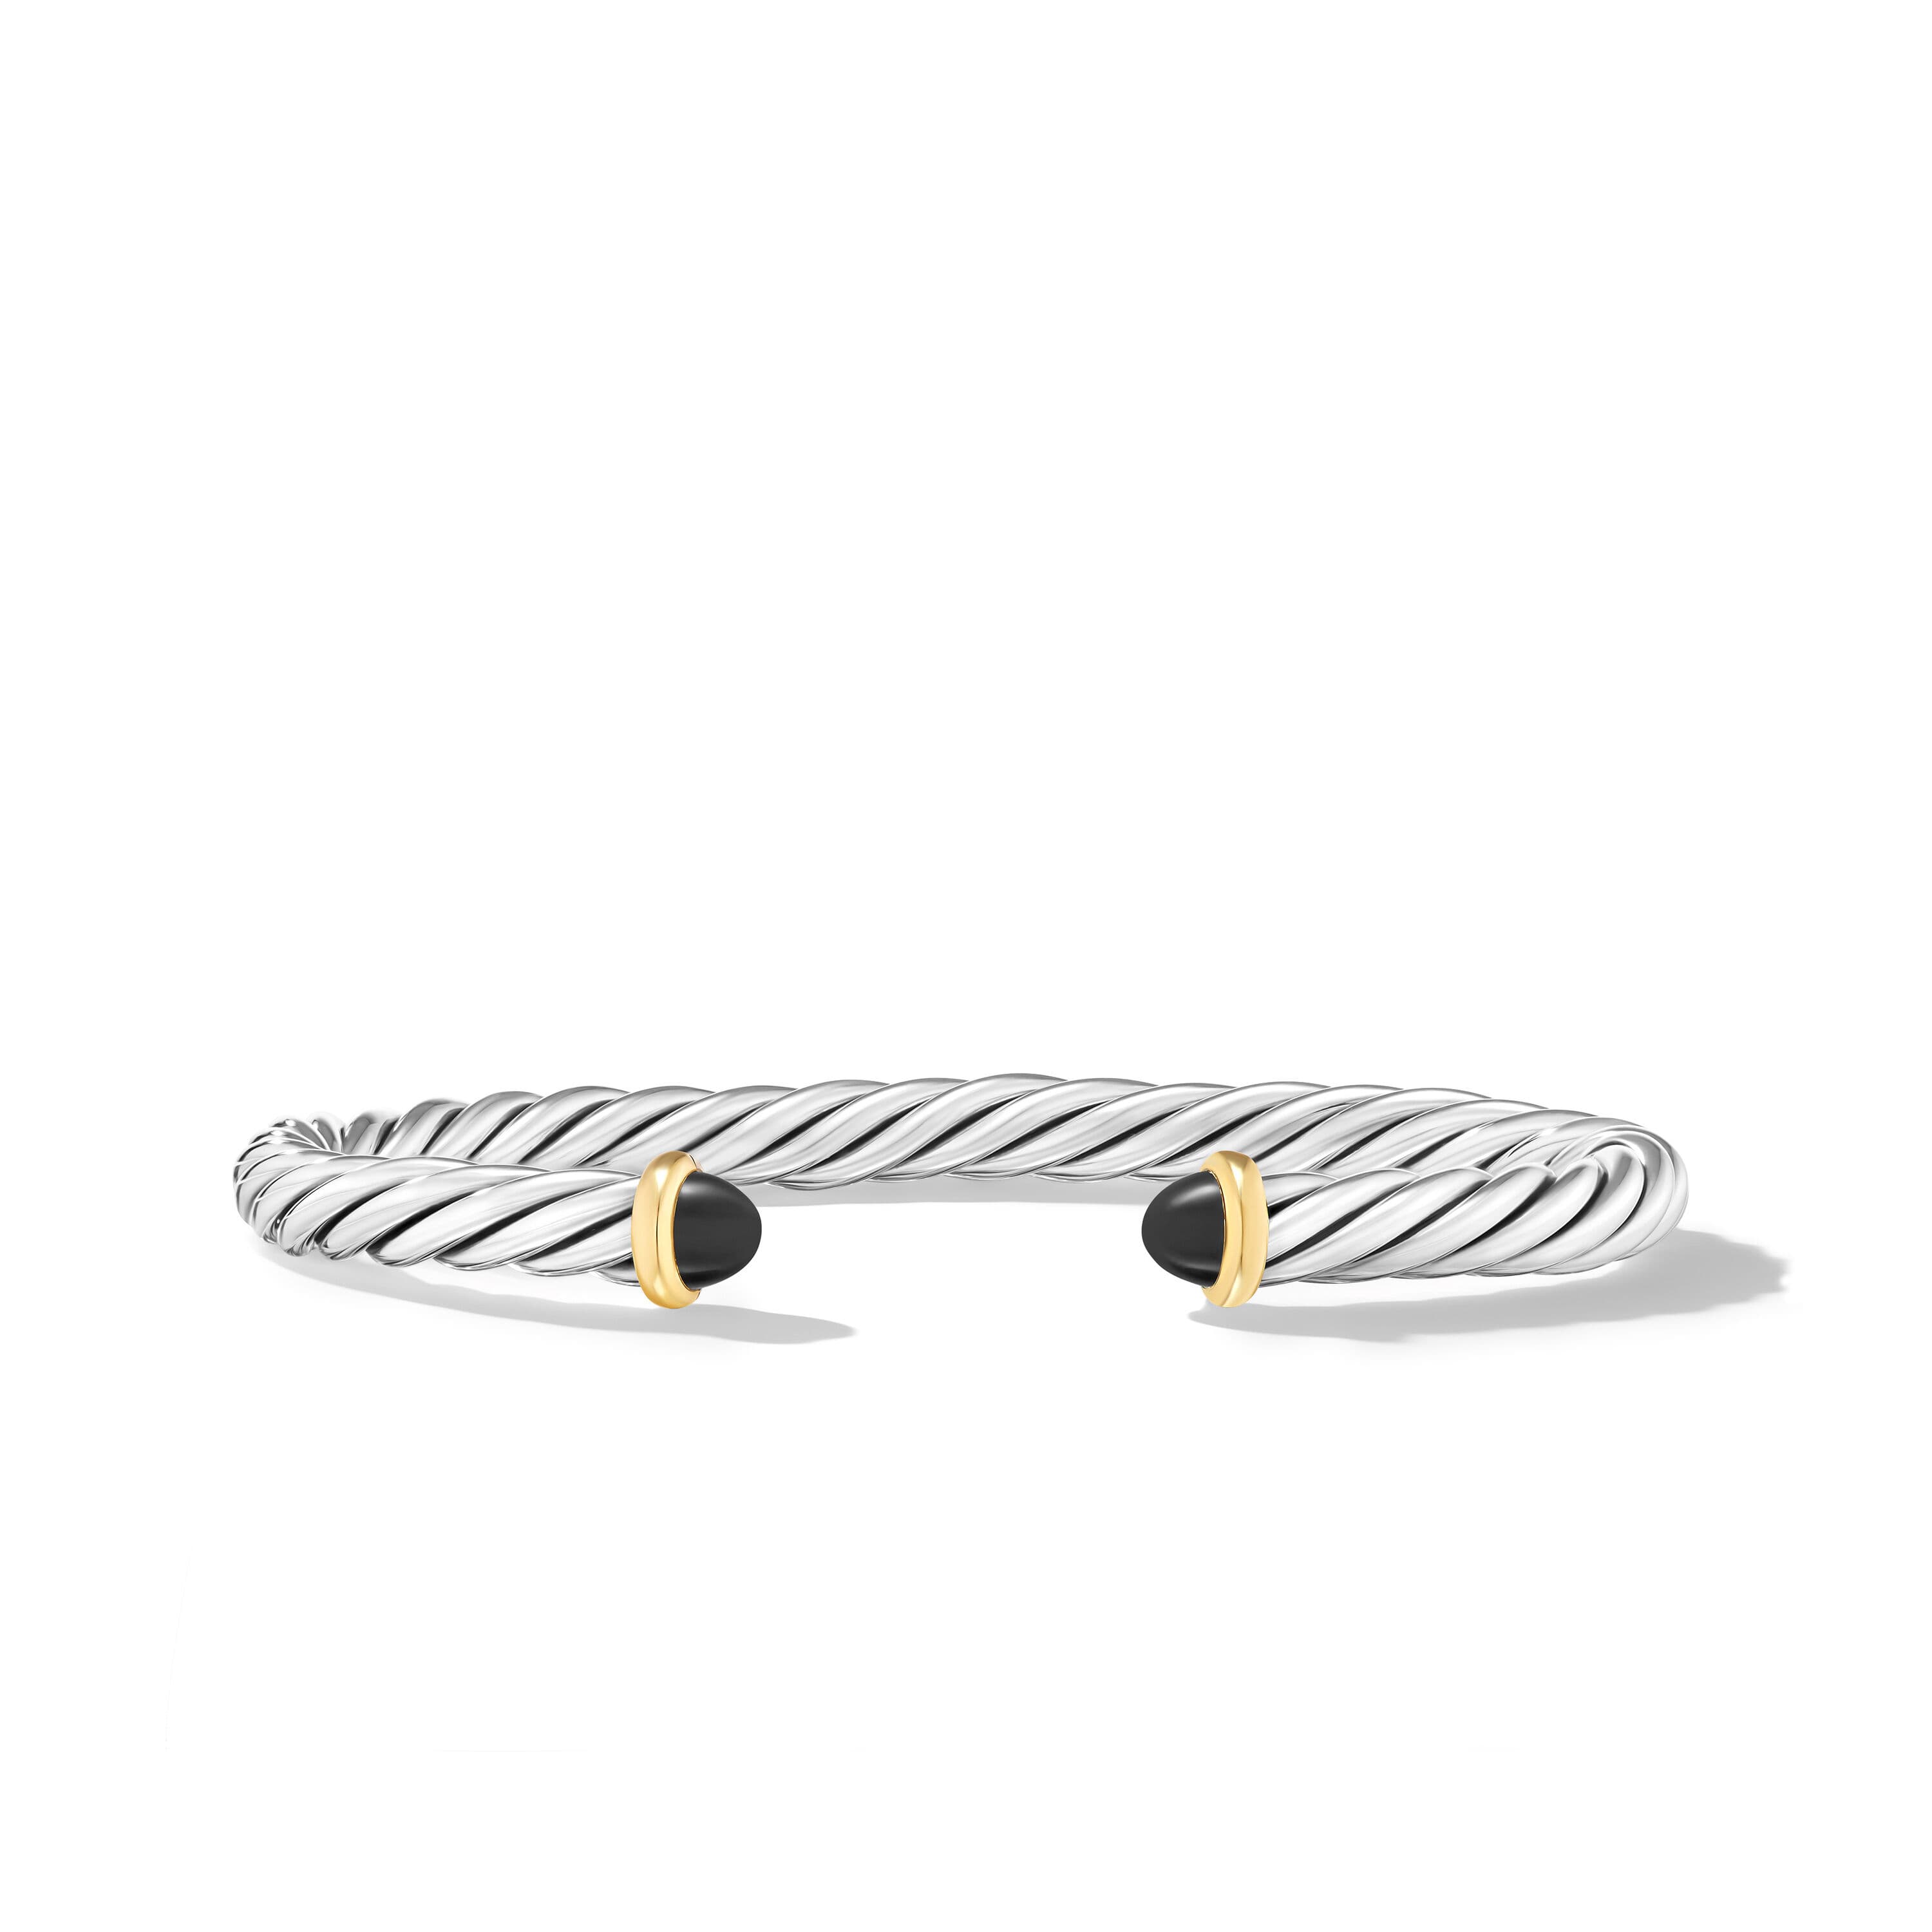 David Yurman 6mm Cable Cuff Bracelet in Sterling Silver with 14K Yellow Gold and Black Onyx, Medium